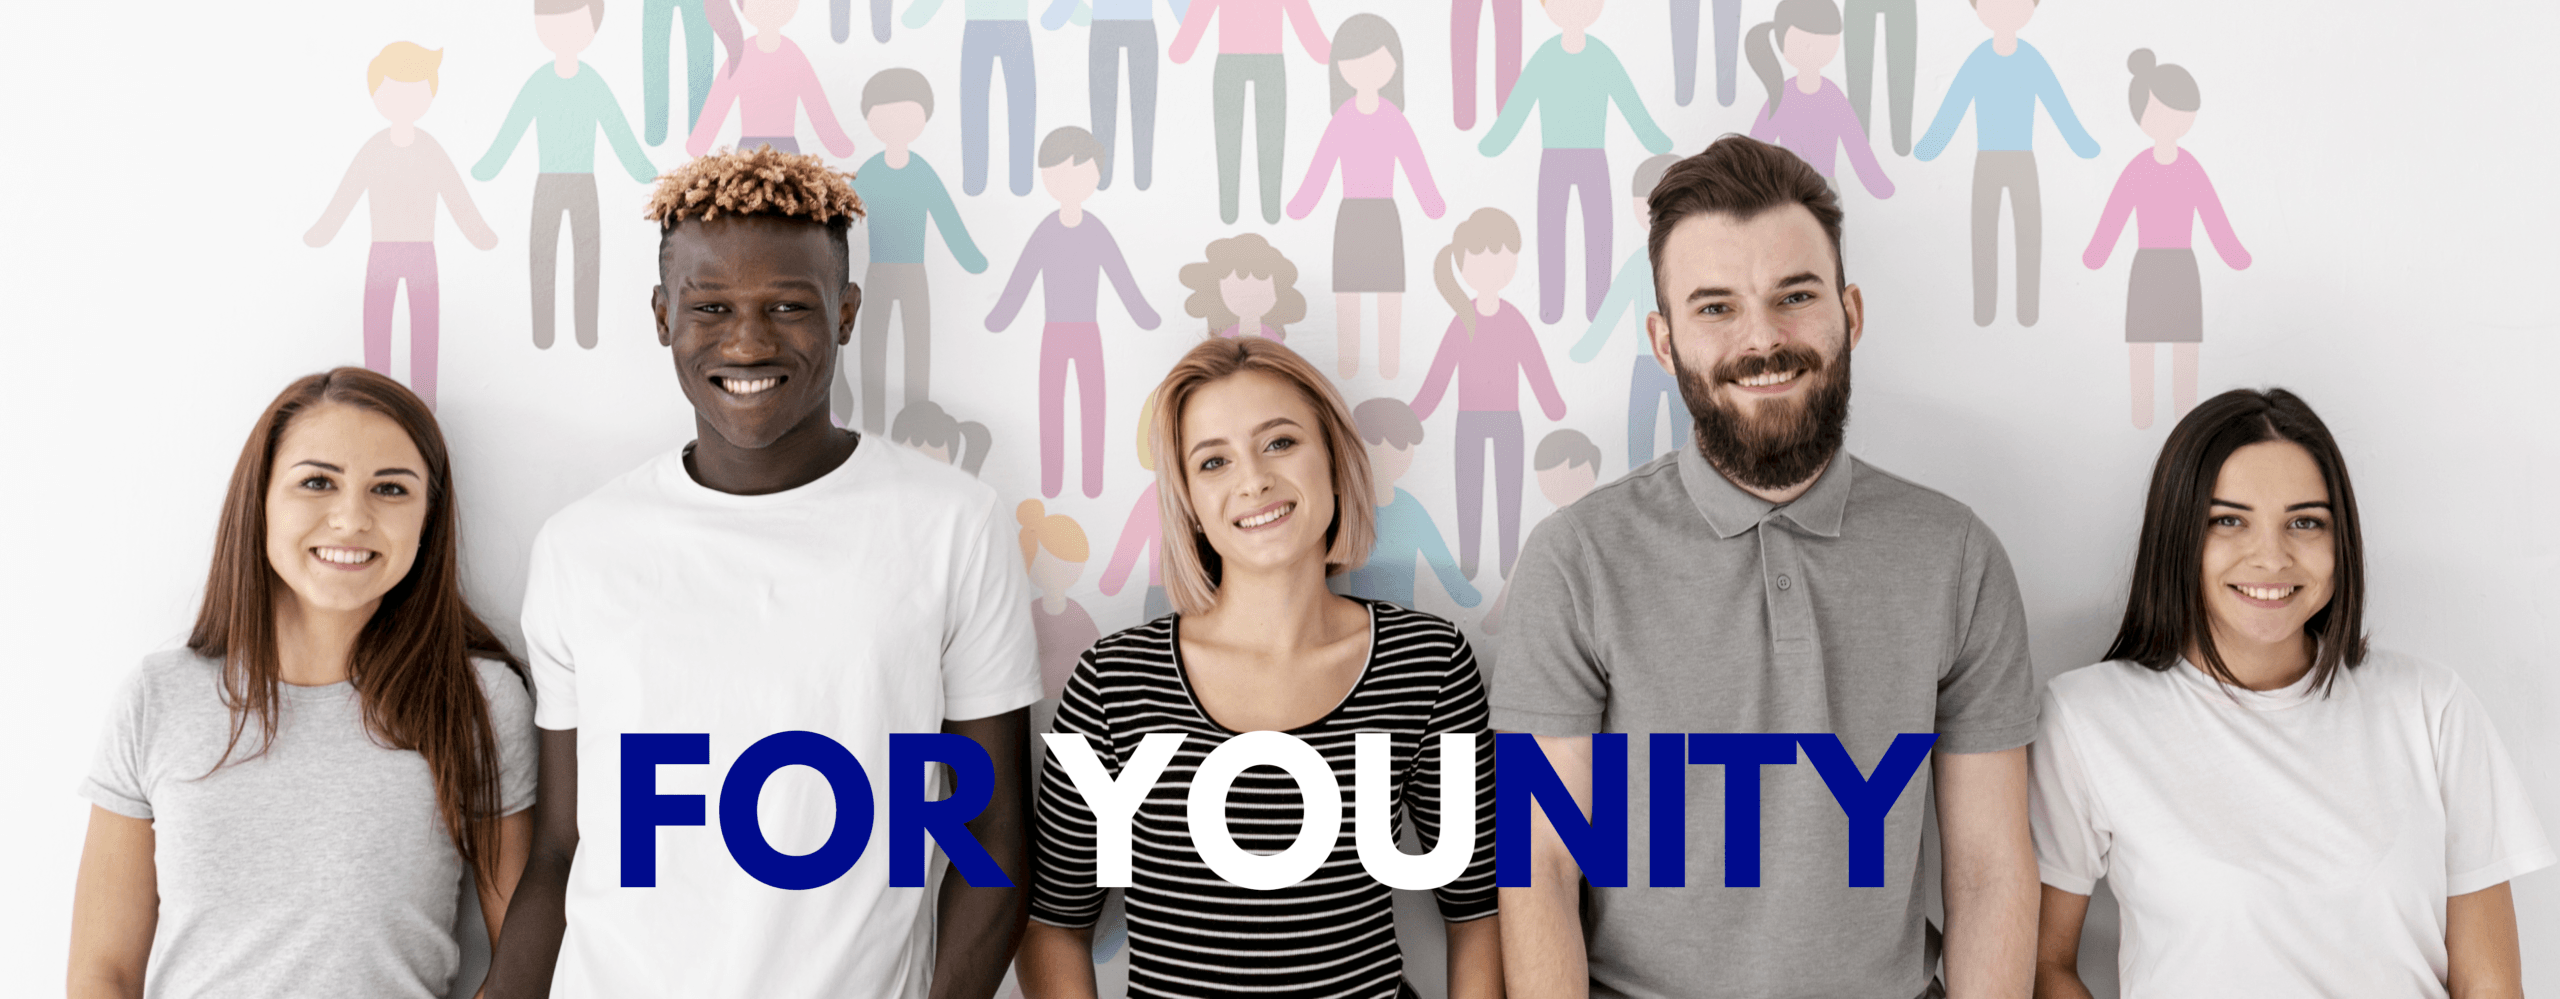 Volunteers for the one year project European Solidarity Corps “For YOUnity” WANTED!